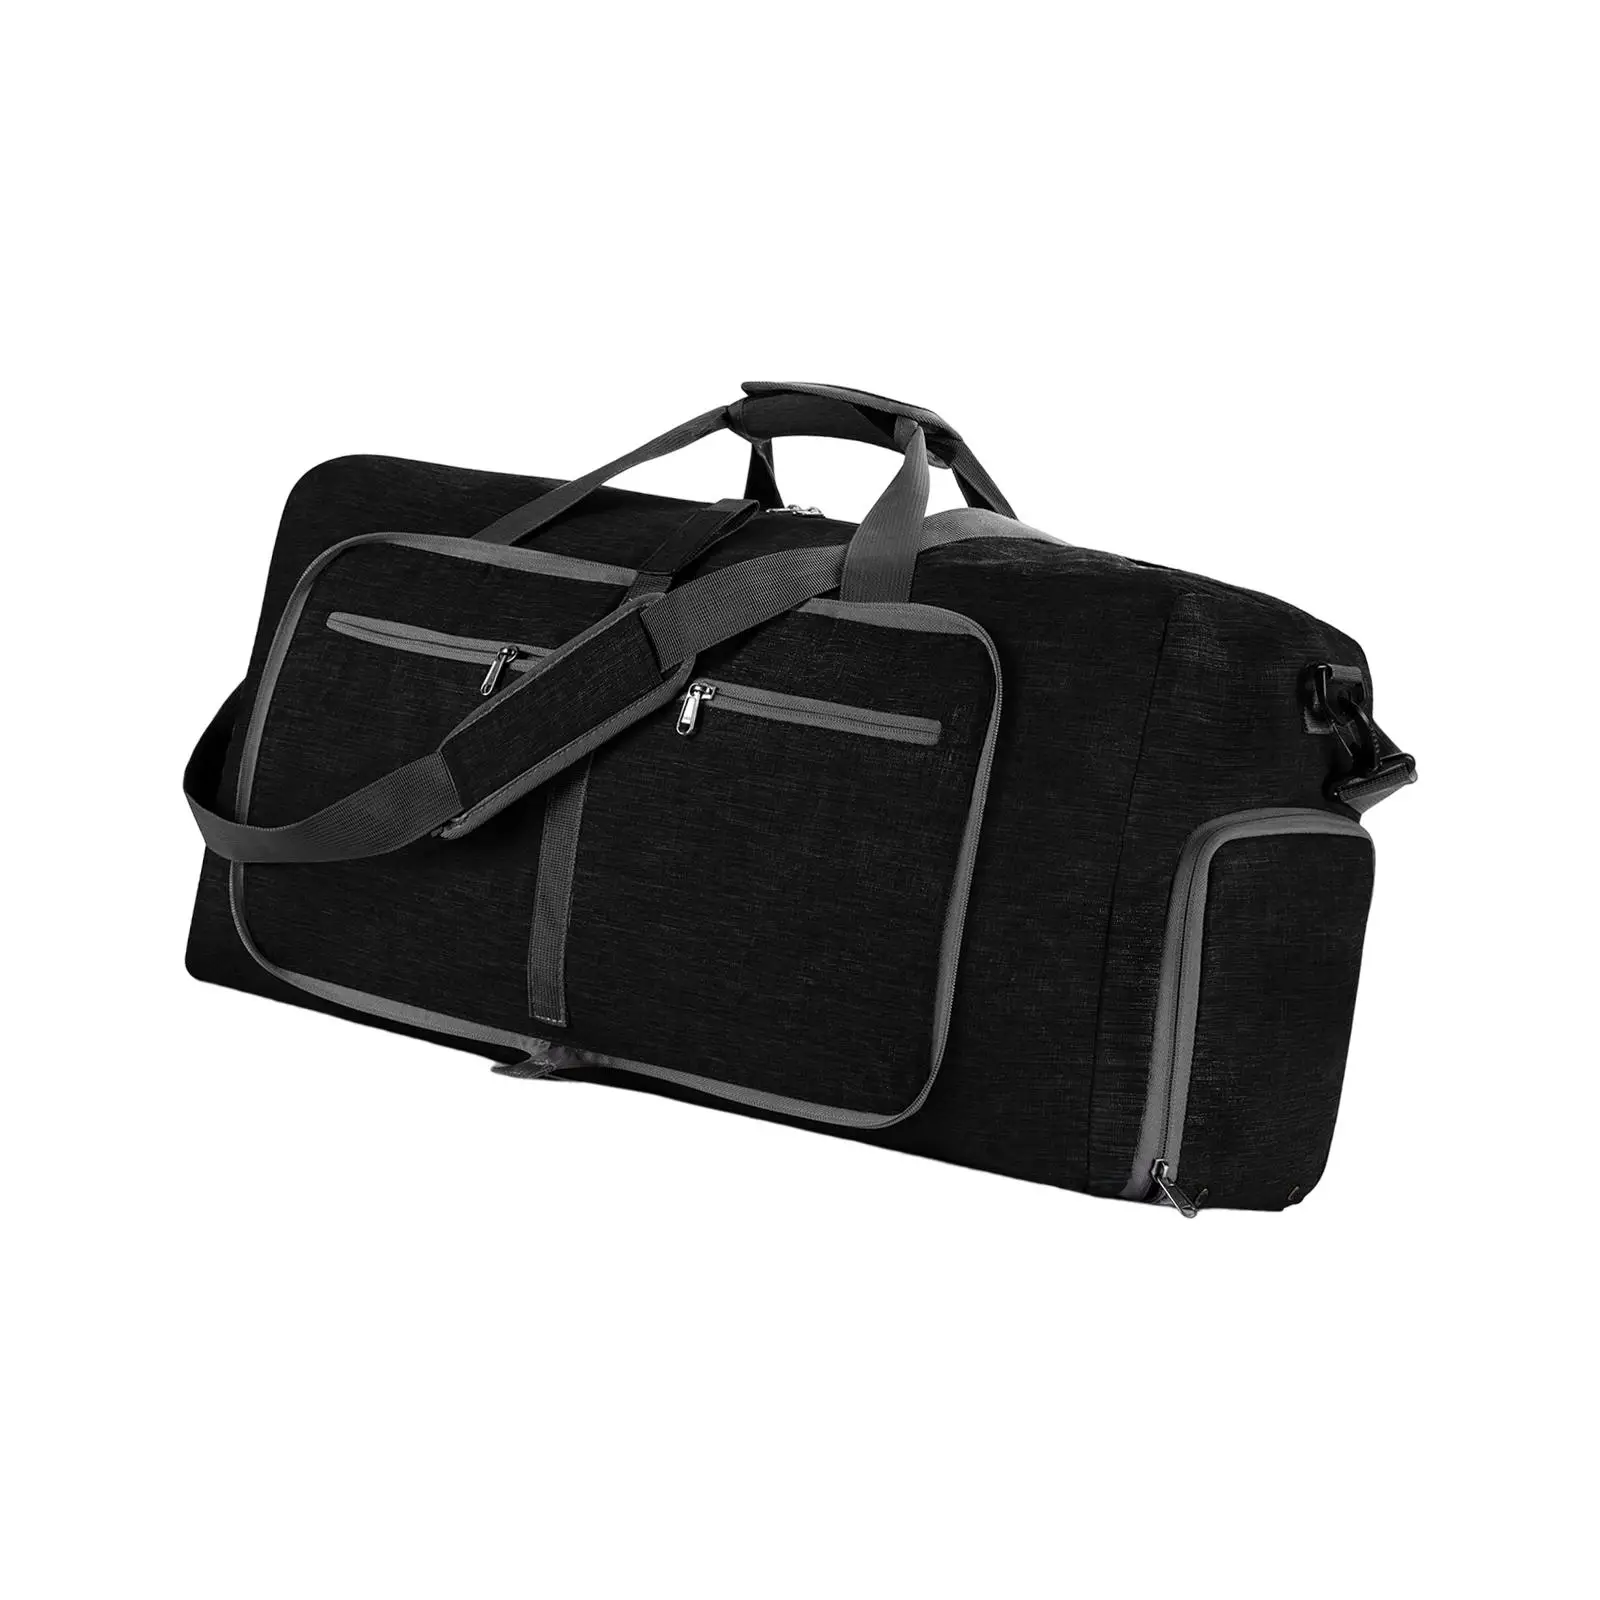 Duffle Bags Weekend Bag Foldable Sports Travel Luggage for Men Women Camping